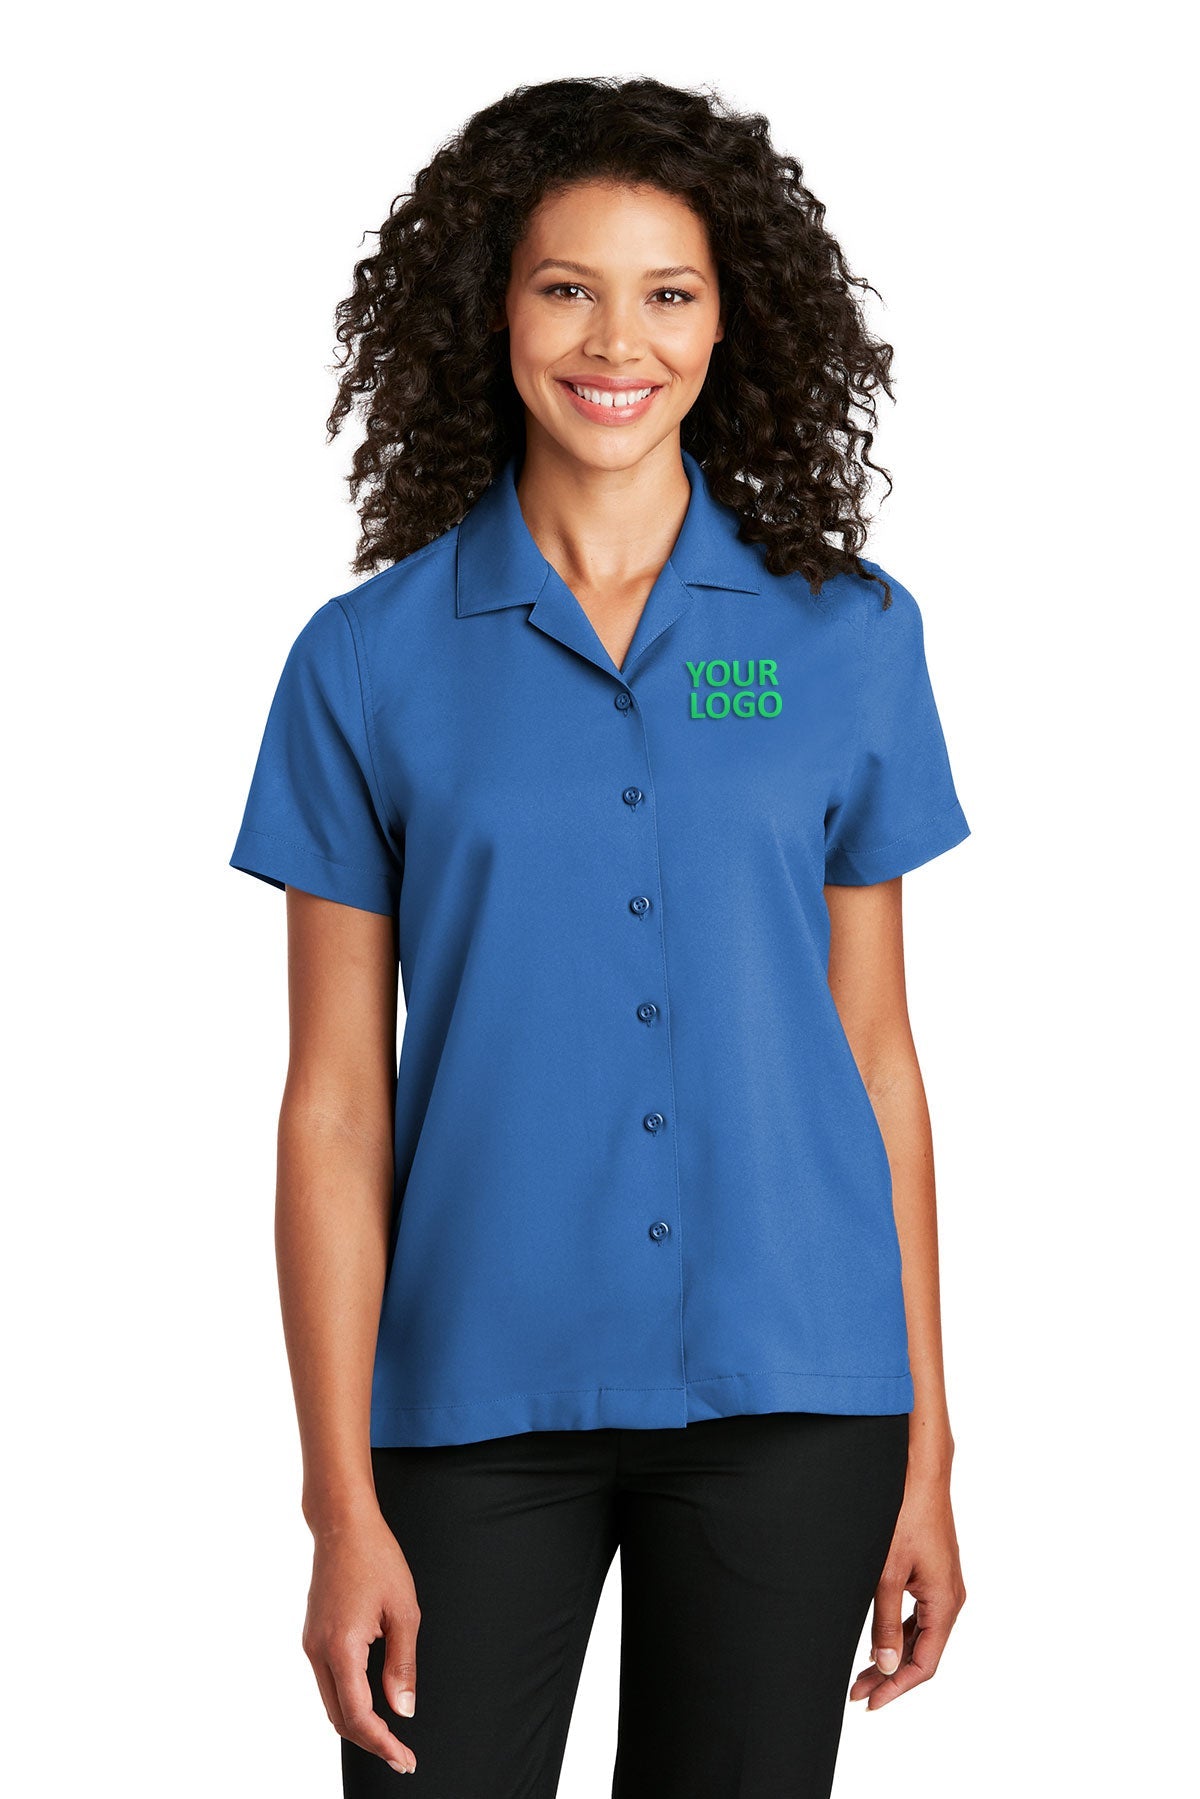 Port Authority True Blue LW400 custom embroidered shirts